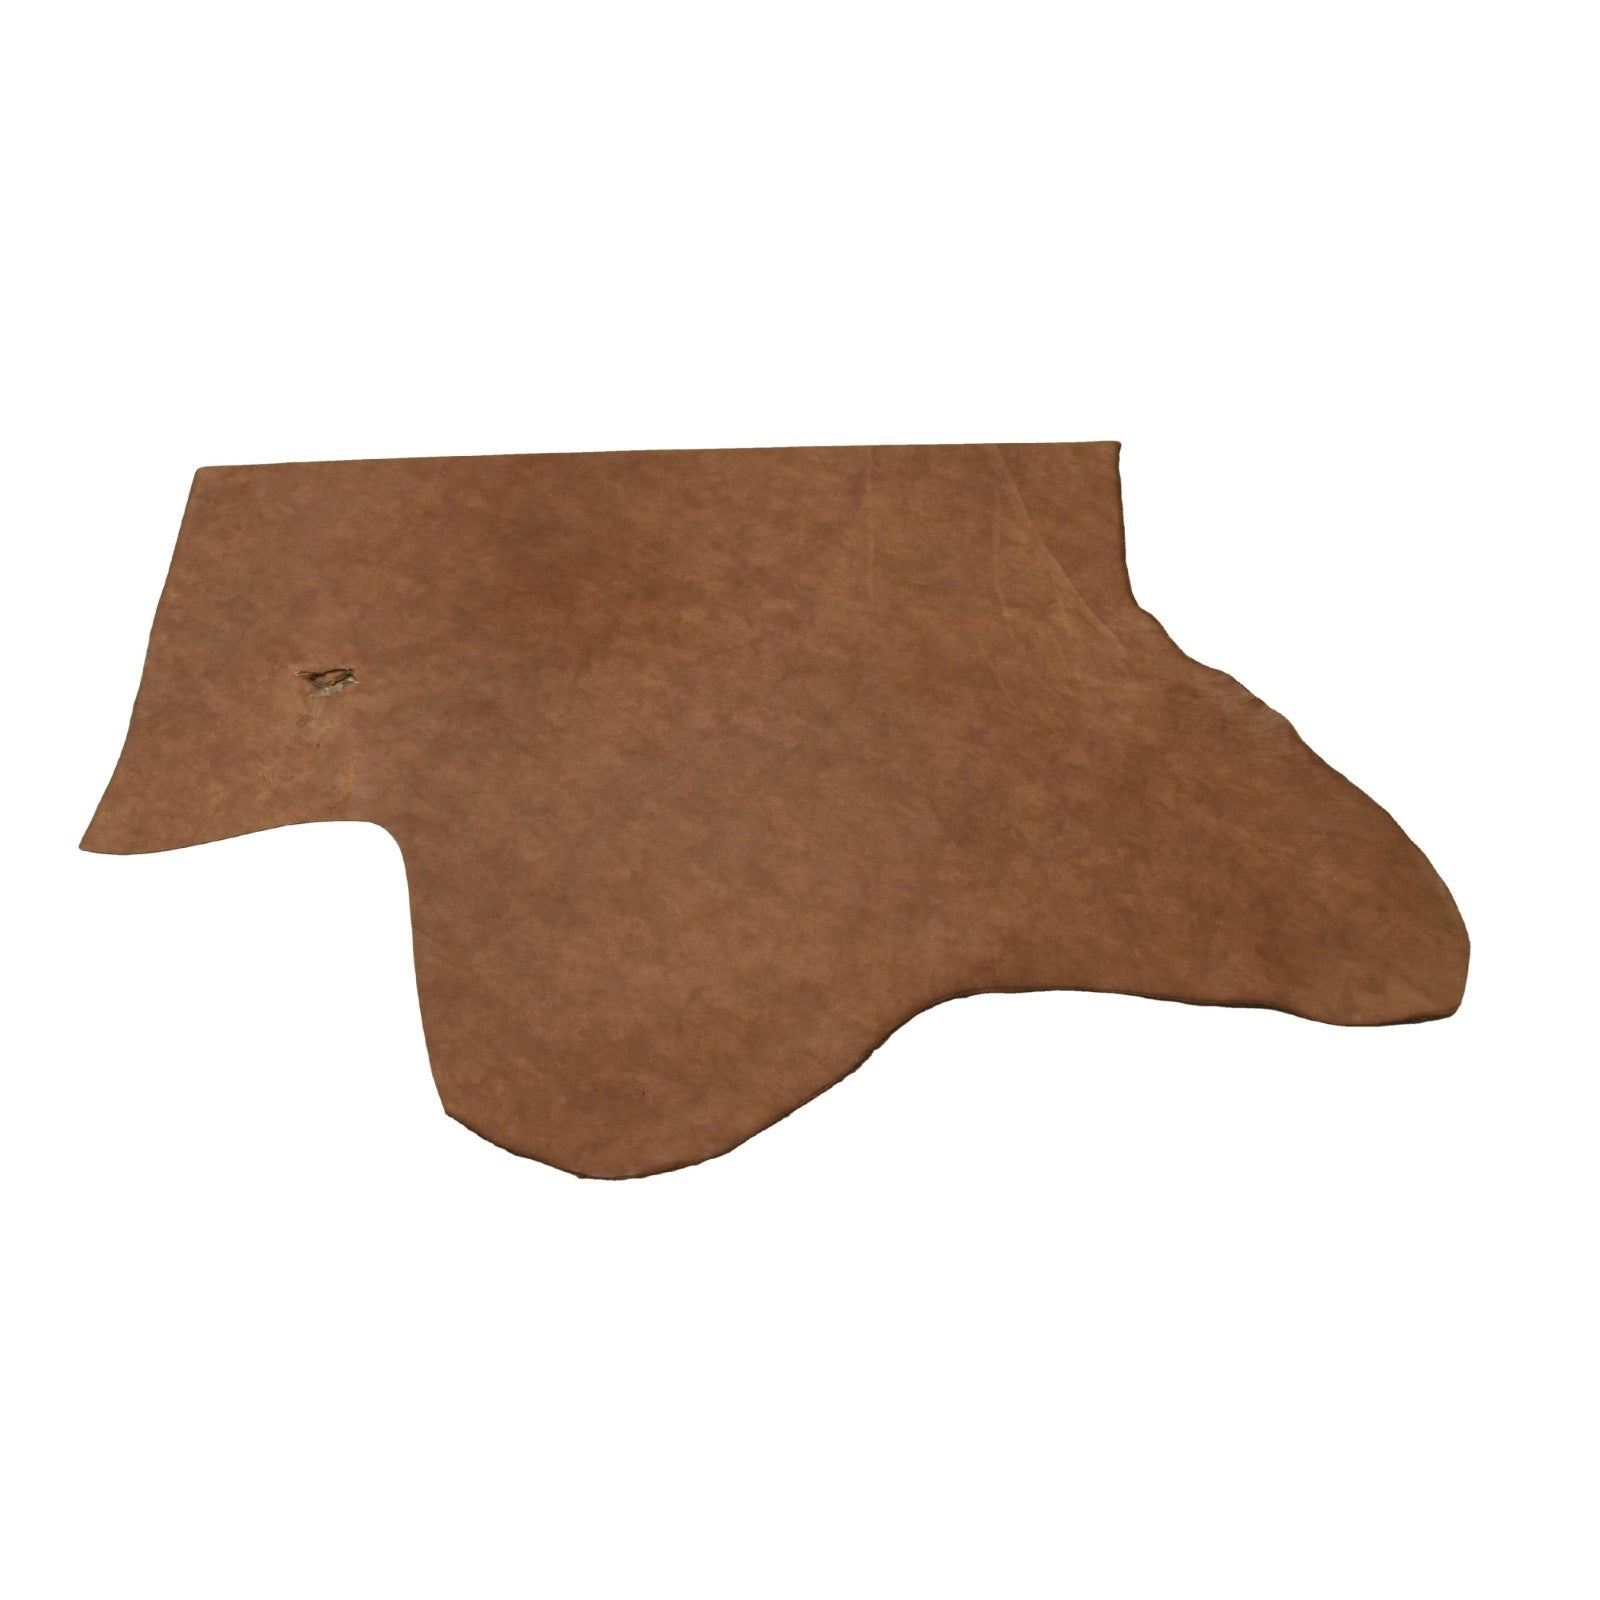 Big Wall Medium Brown, Oil Tanned Summits Edge Sides & Pieces, 6.5 - 7.5 Sq Ft / Project Piece (Bottom) | The Leather Guy